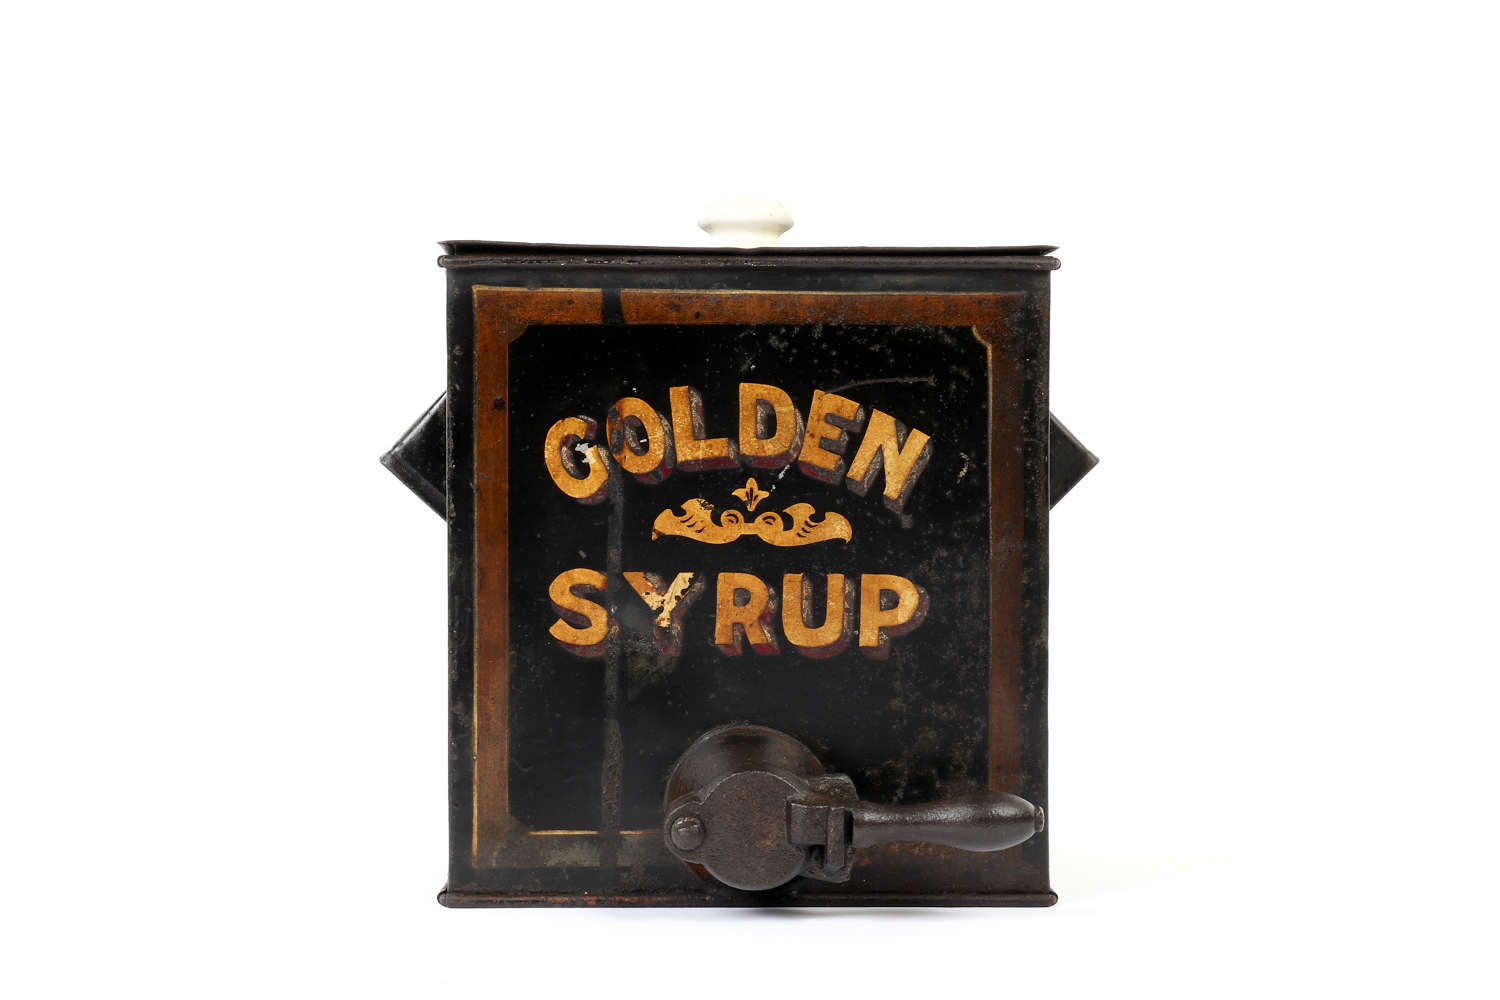 Early 20th century toleware golden syrup dispenser